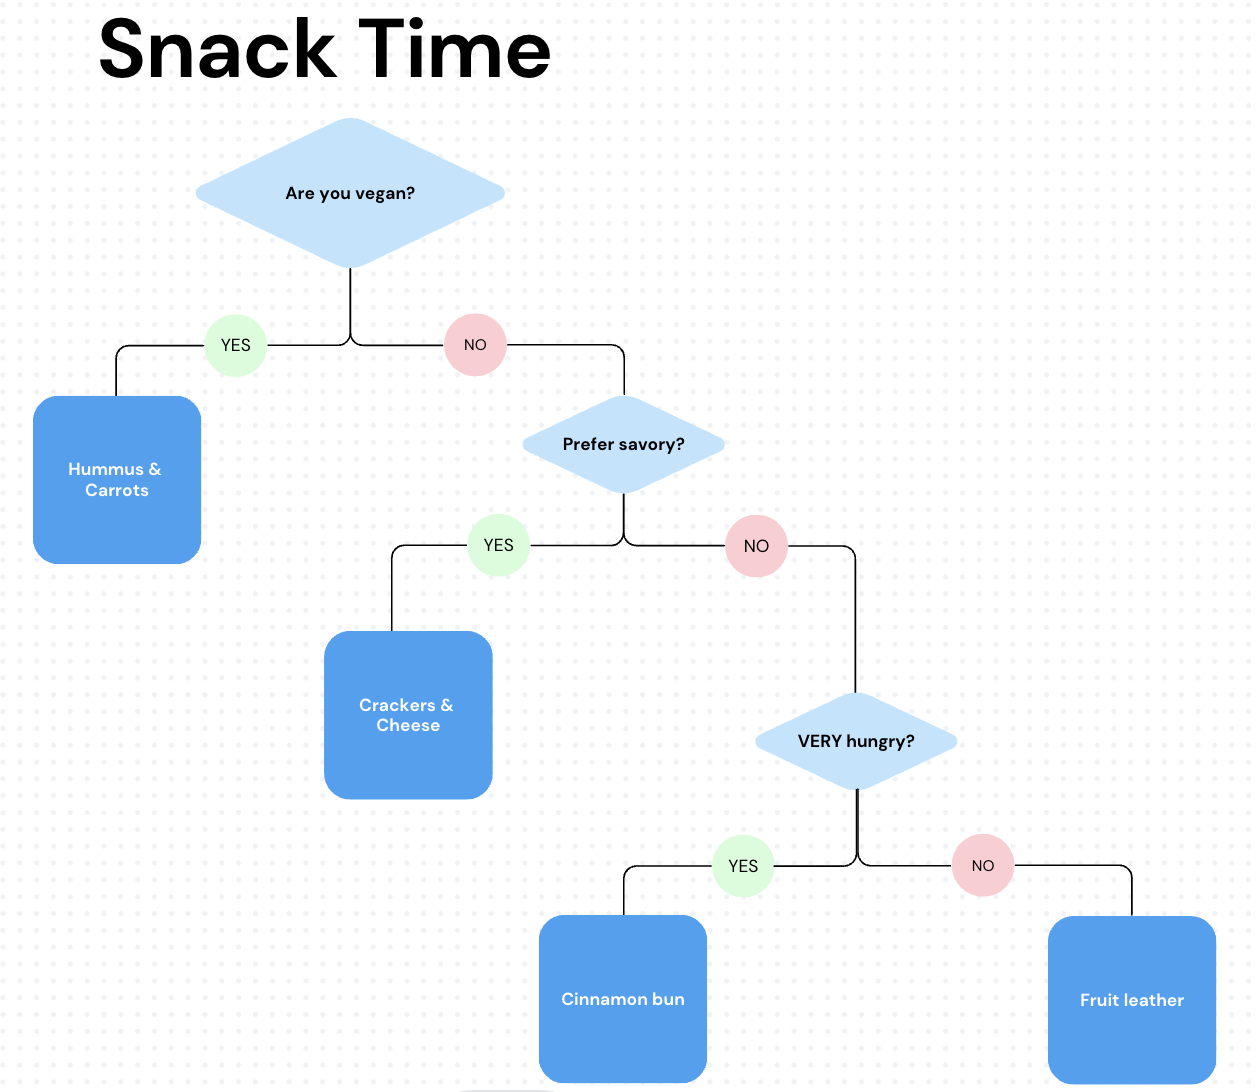 A decision tree for choosing the perfect snack